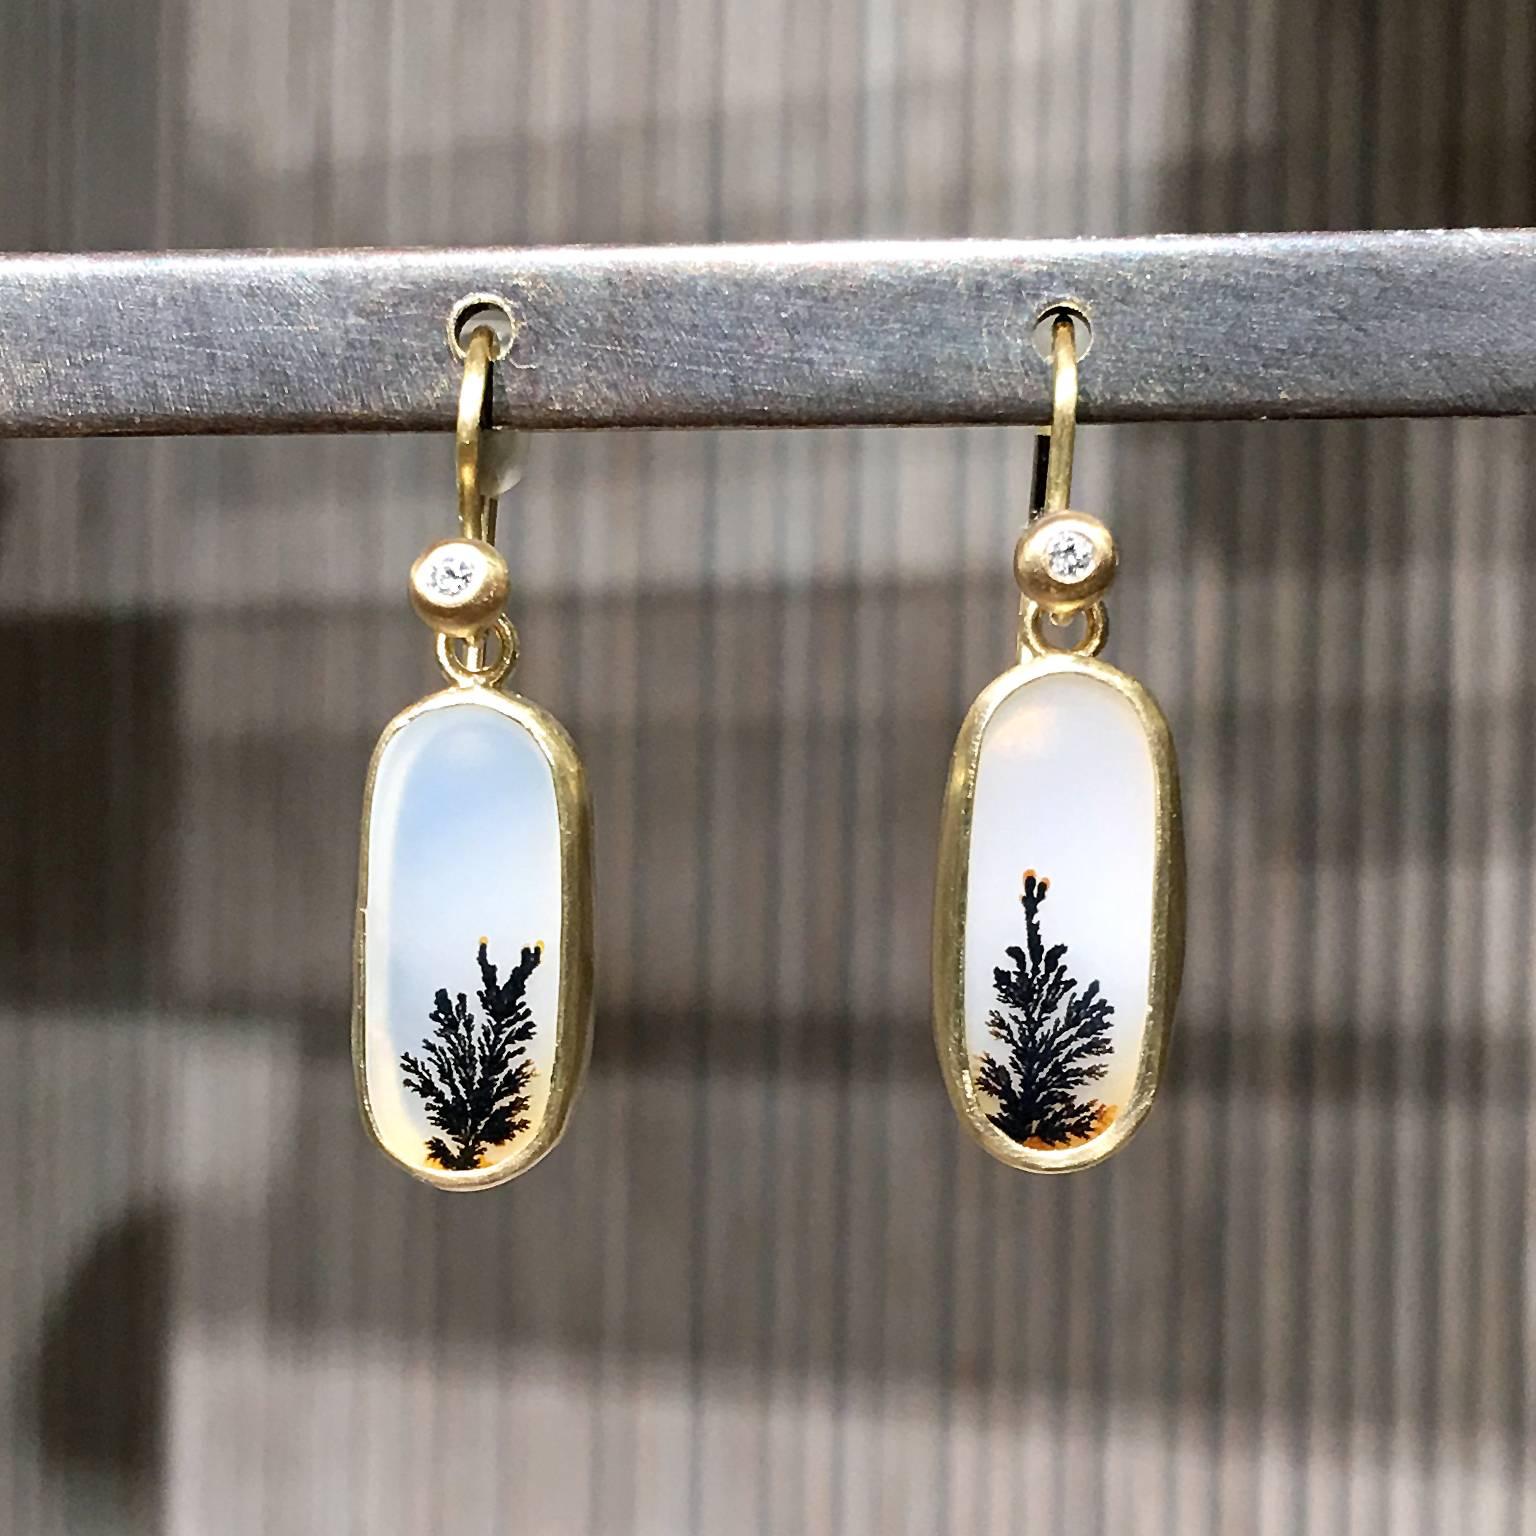 Artist One of a Kind Translucent White and Black Dendrite Agate Diamond Dangle Earrings